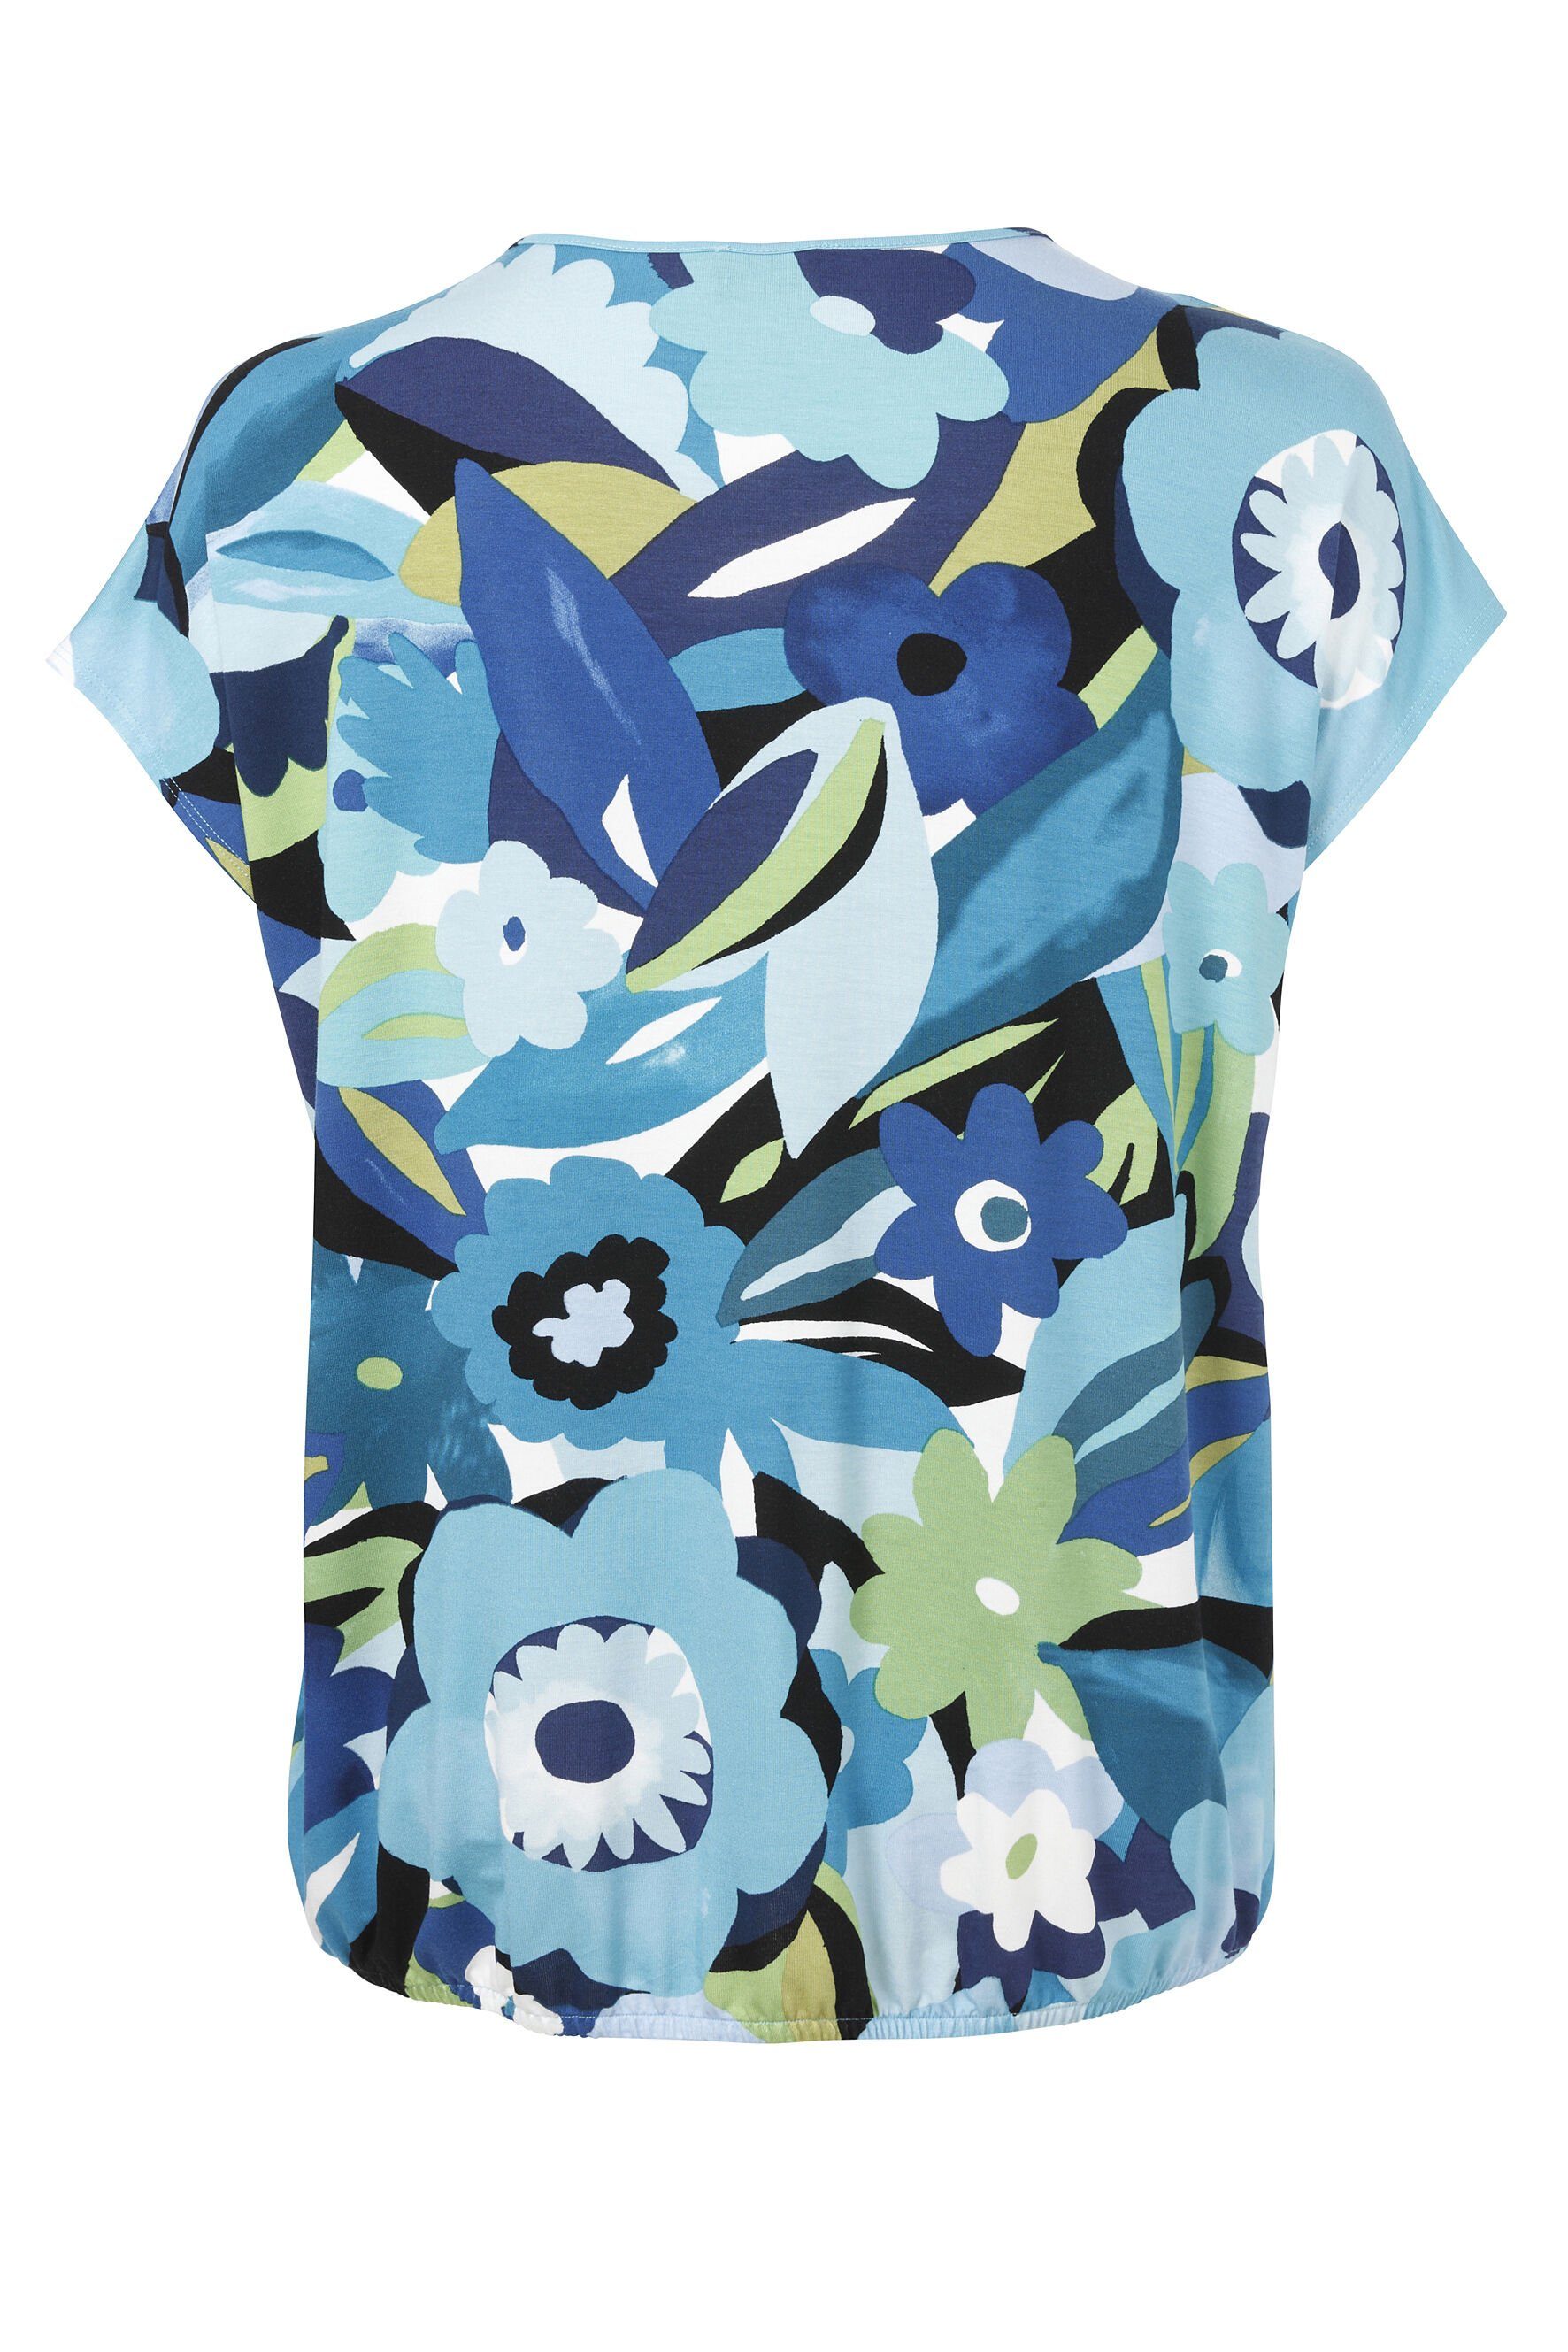 VIA APPIA DUE Print-Shirt in Allover-Muster Allover-Muster